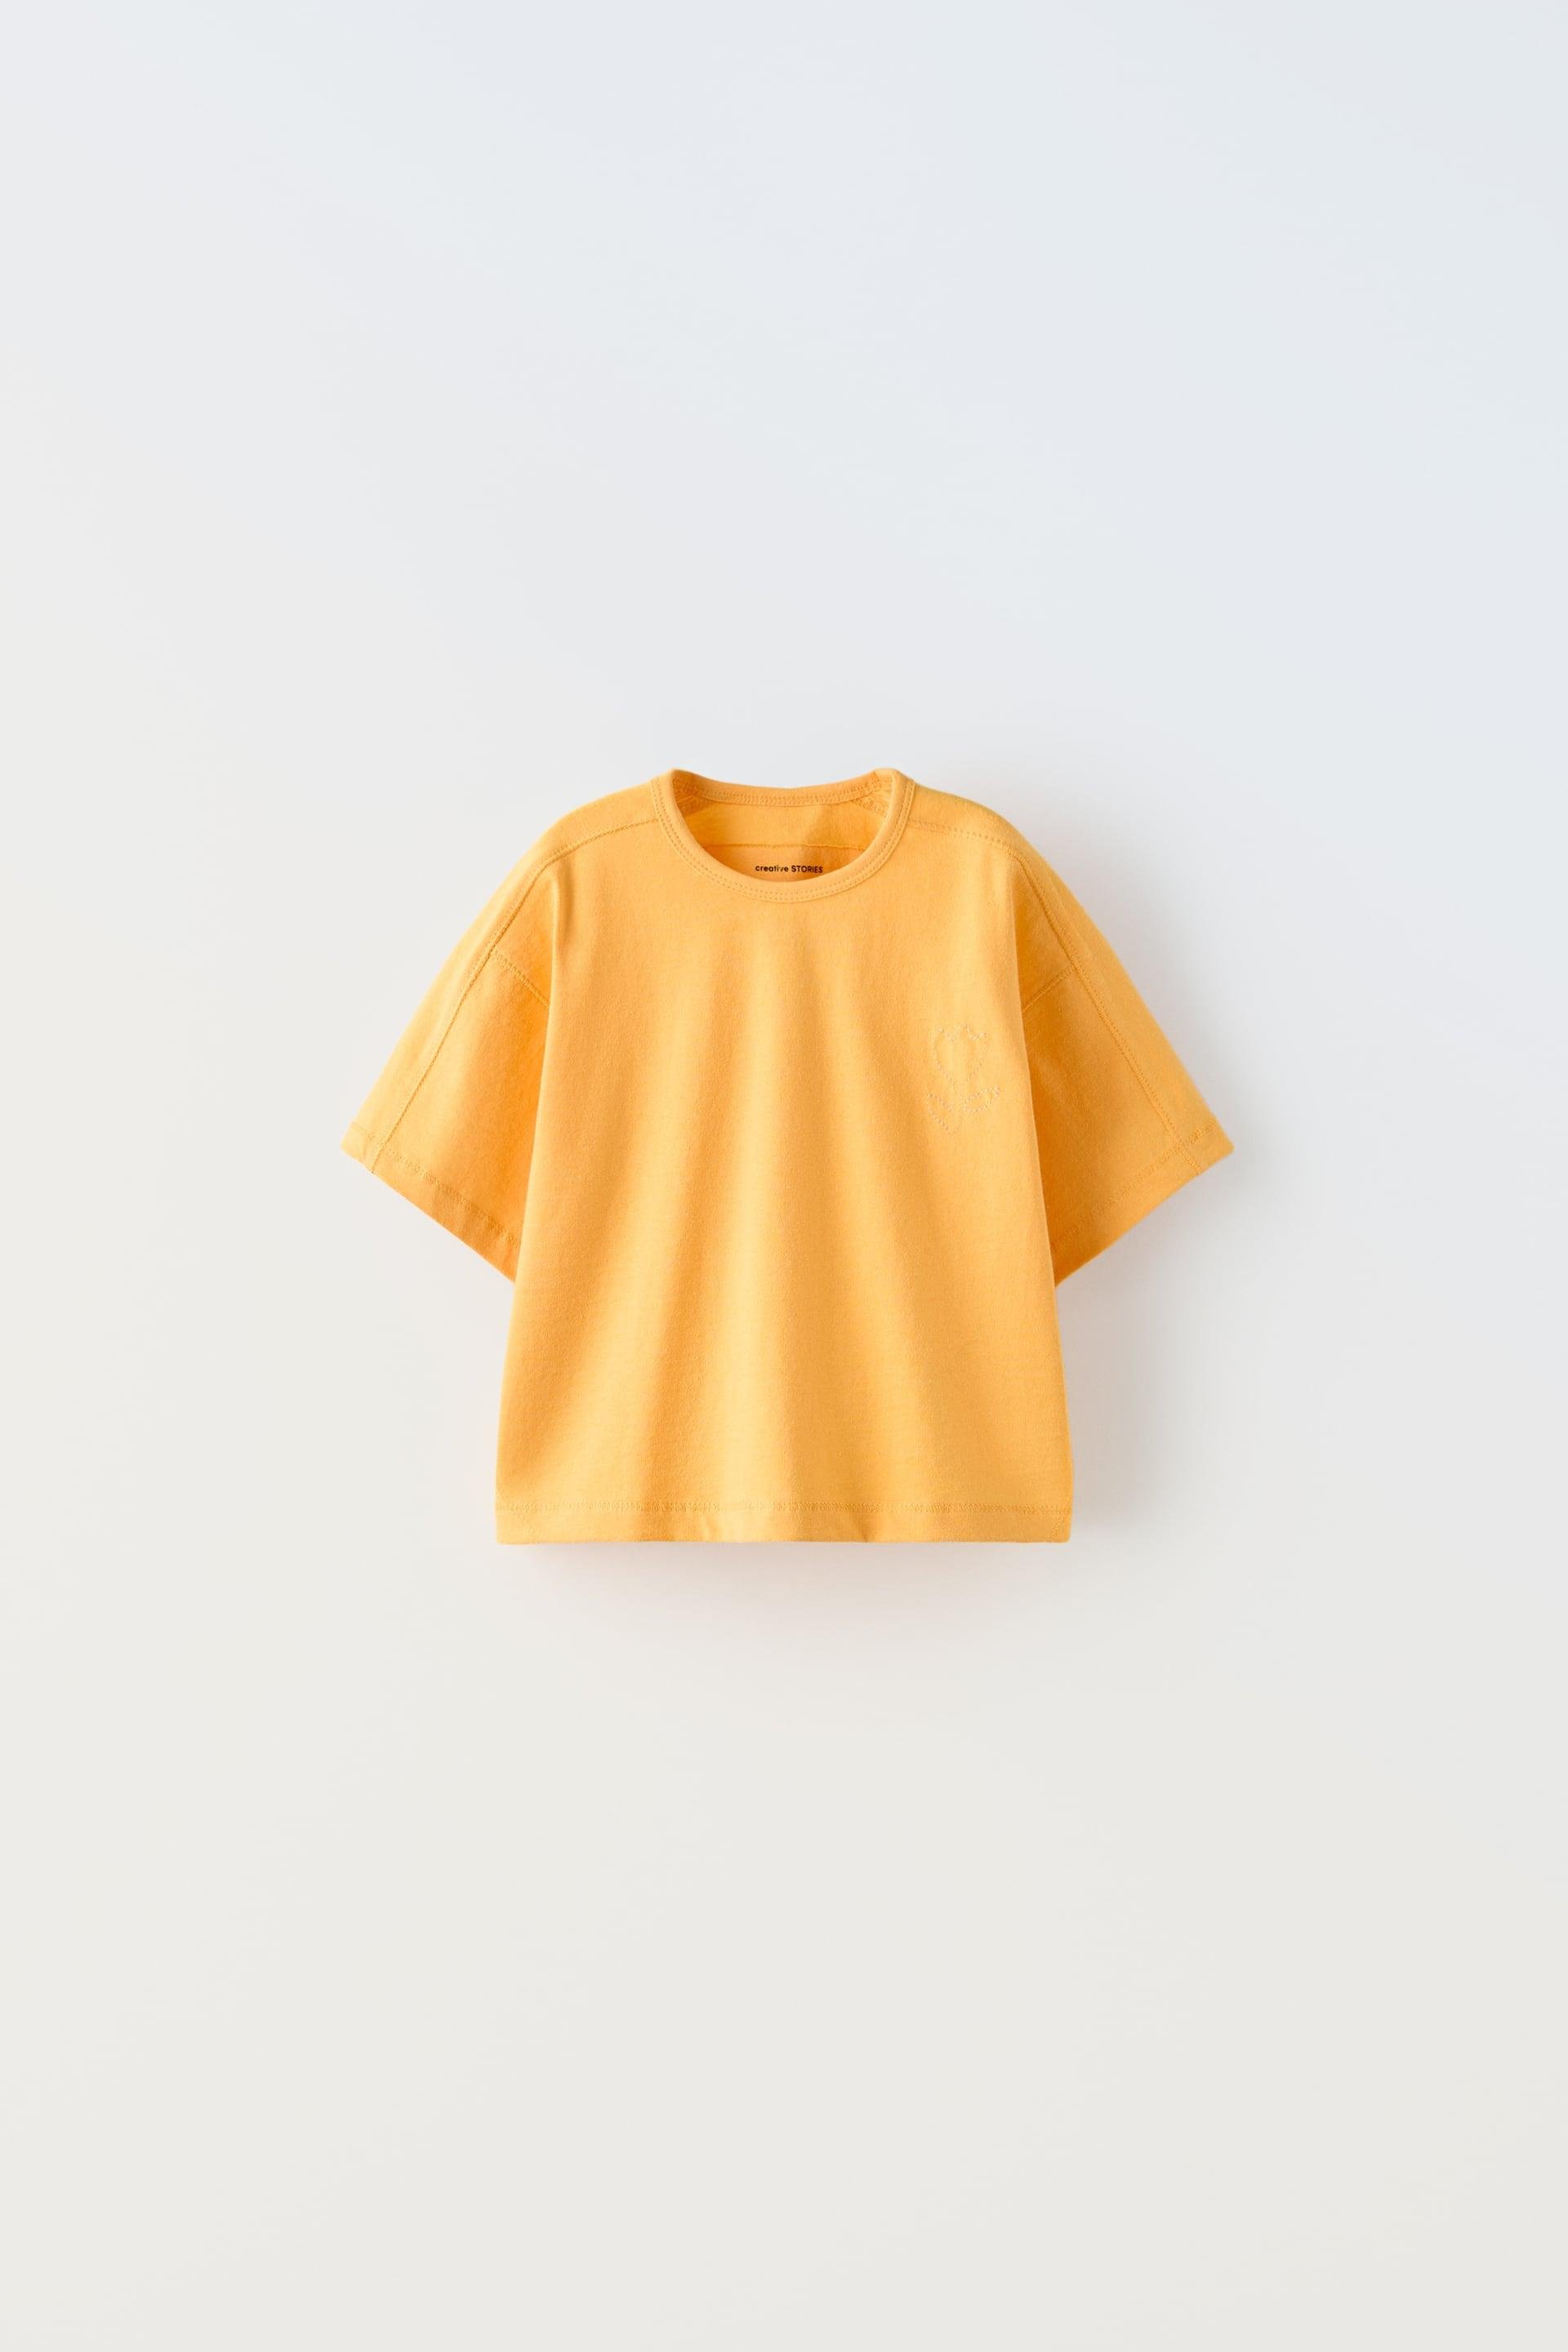 EMBROIDERED T-SHIRT by ZARA